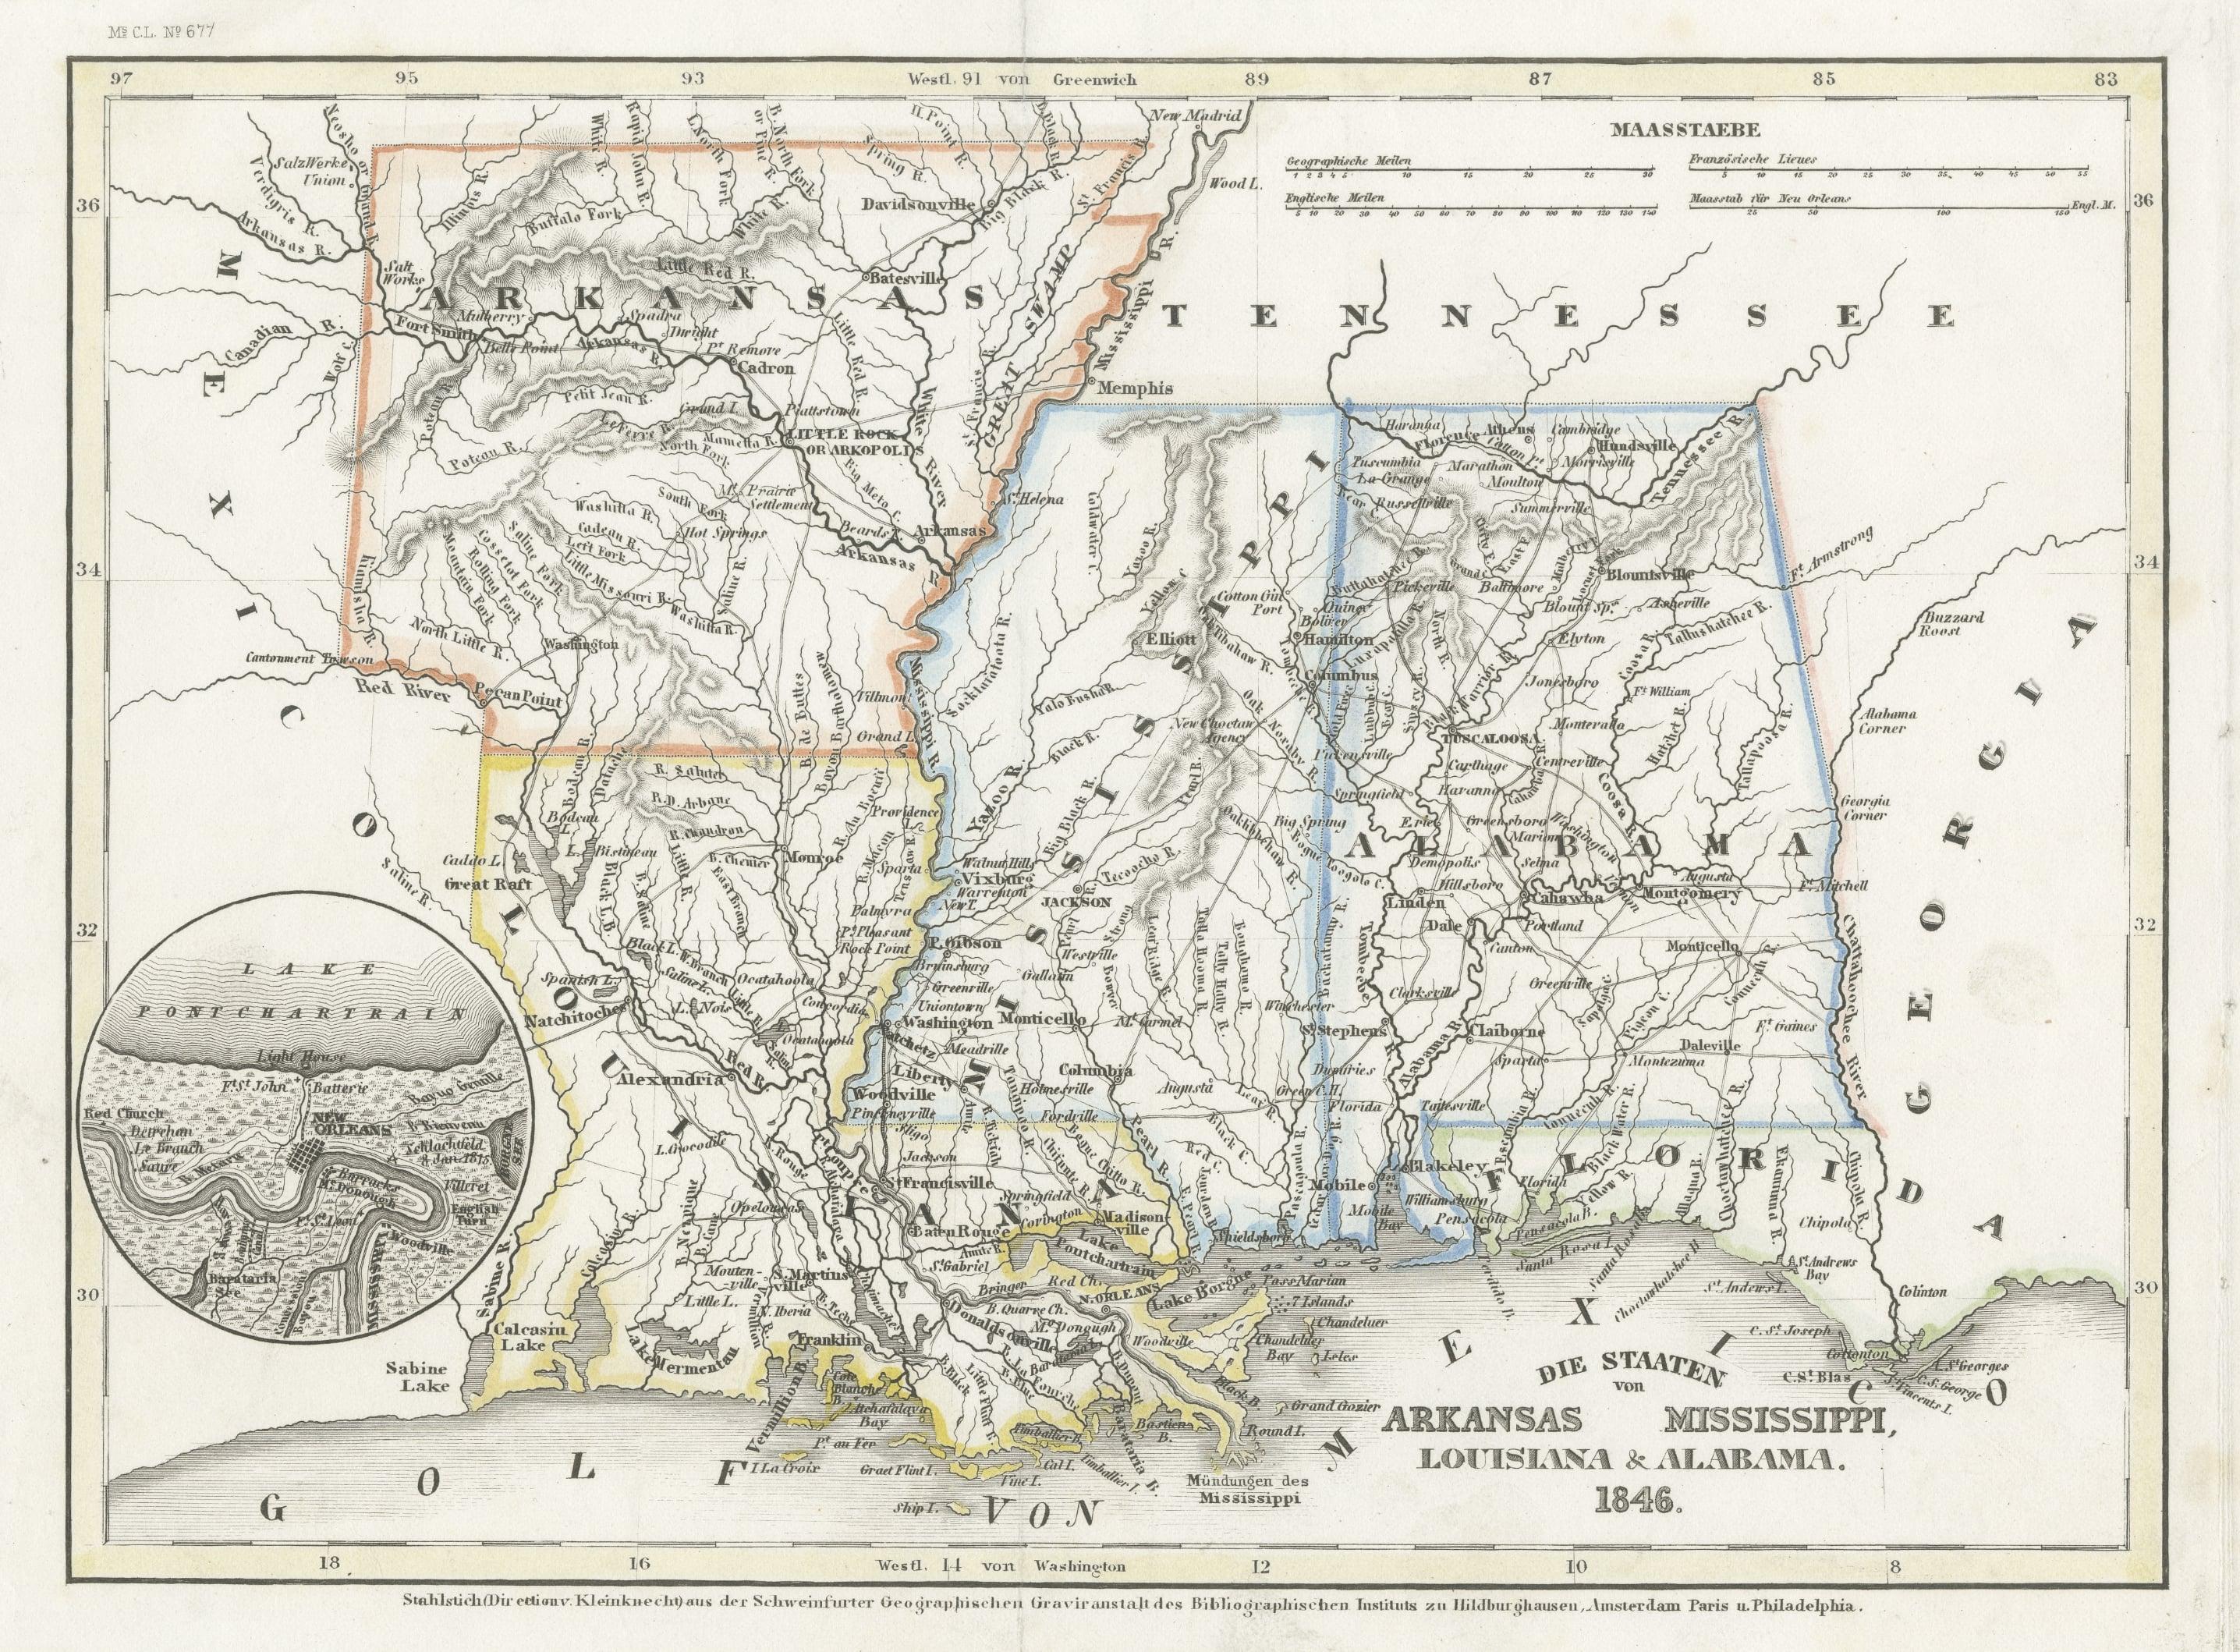 Antique map titled 'Die Staaten von Arkansas Mississippi, Louisiana & Alabama'. Detailed map of the region, which includes the Florida Panhandle. Shows many roads, rivers, forts, etc. Inset of New Oreleans vicinity. Published by J. Meyer, circa